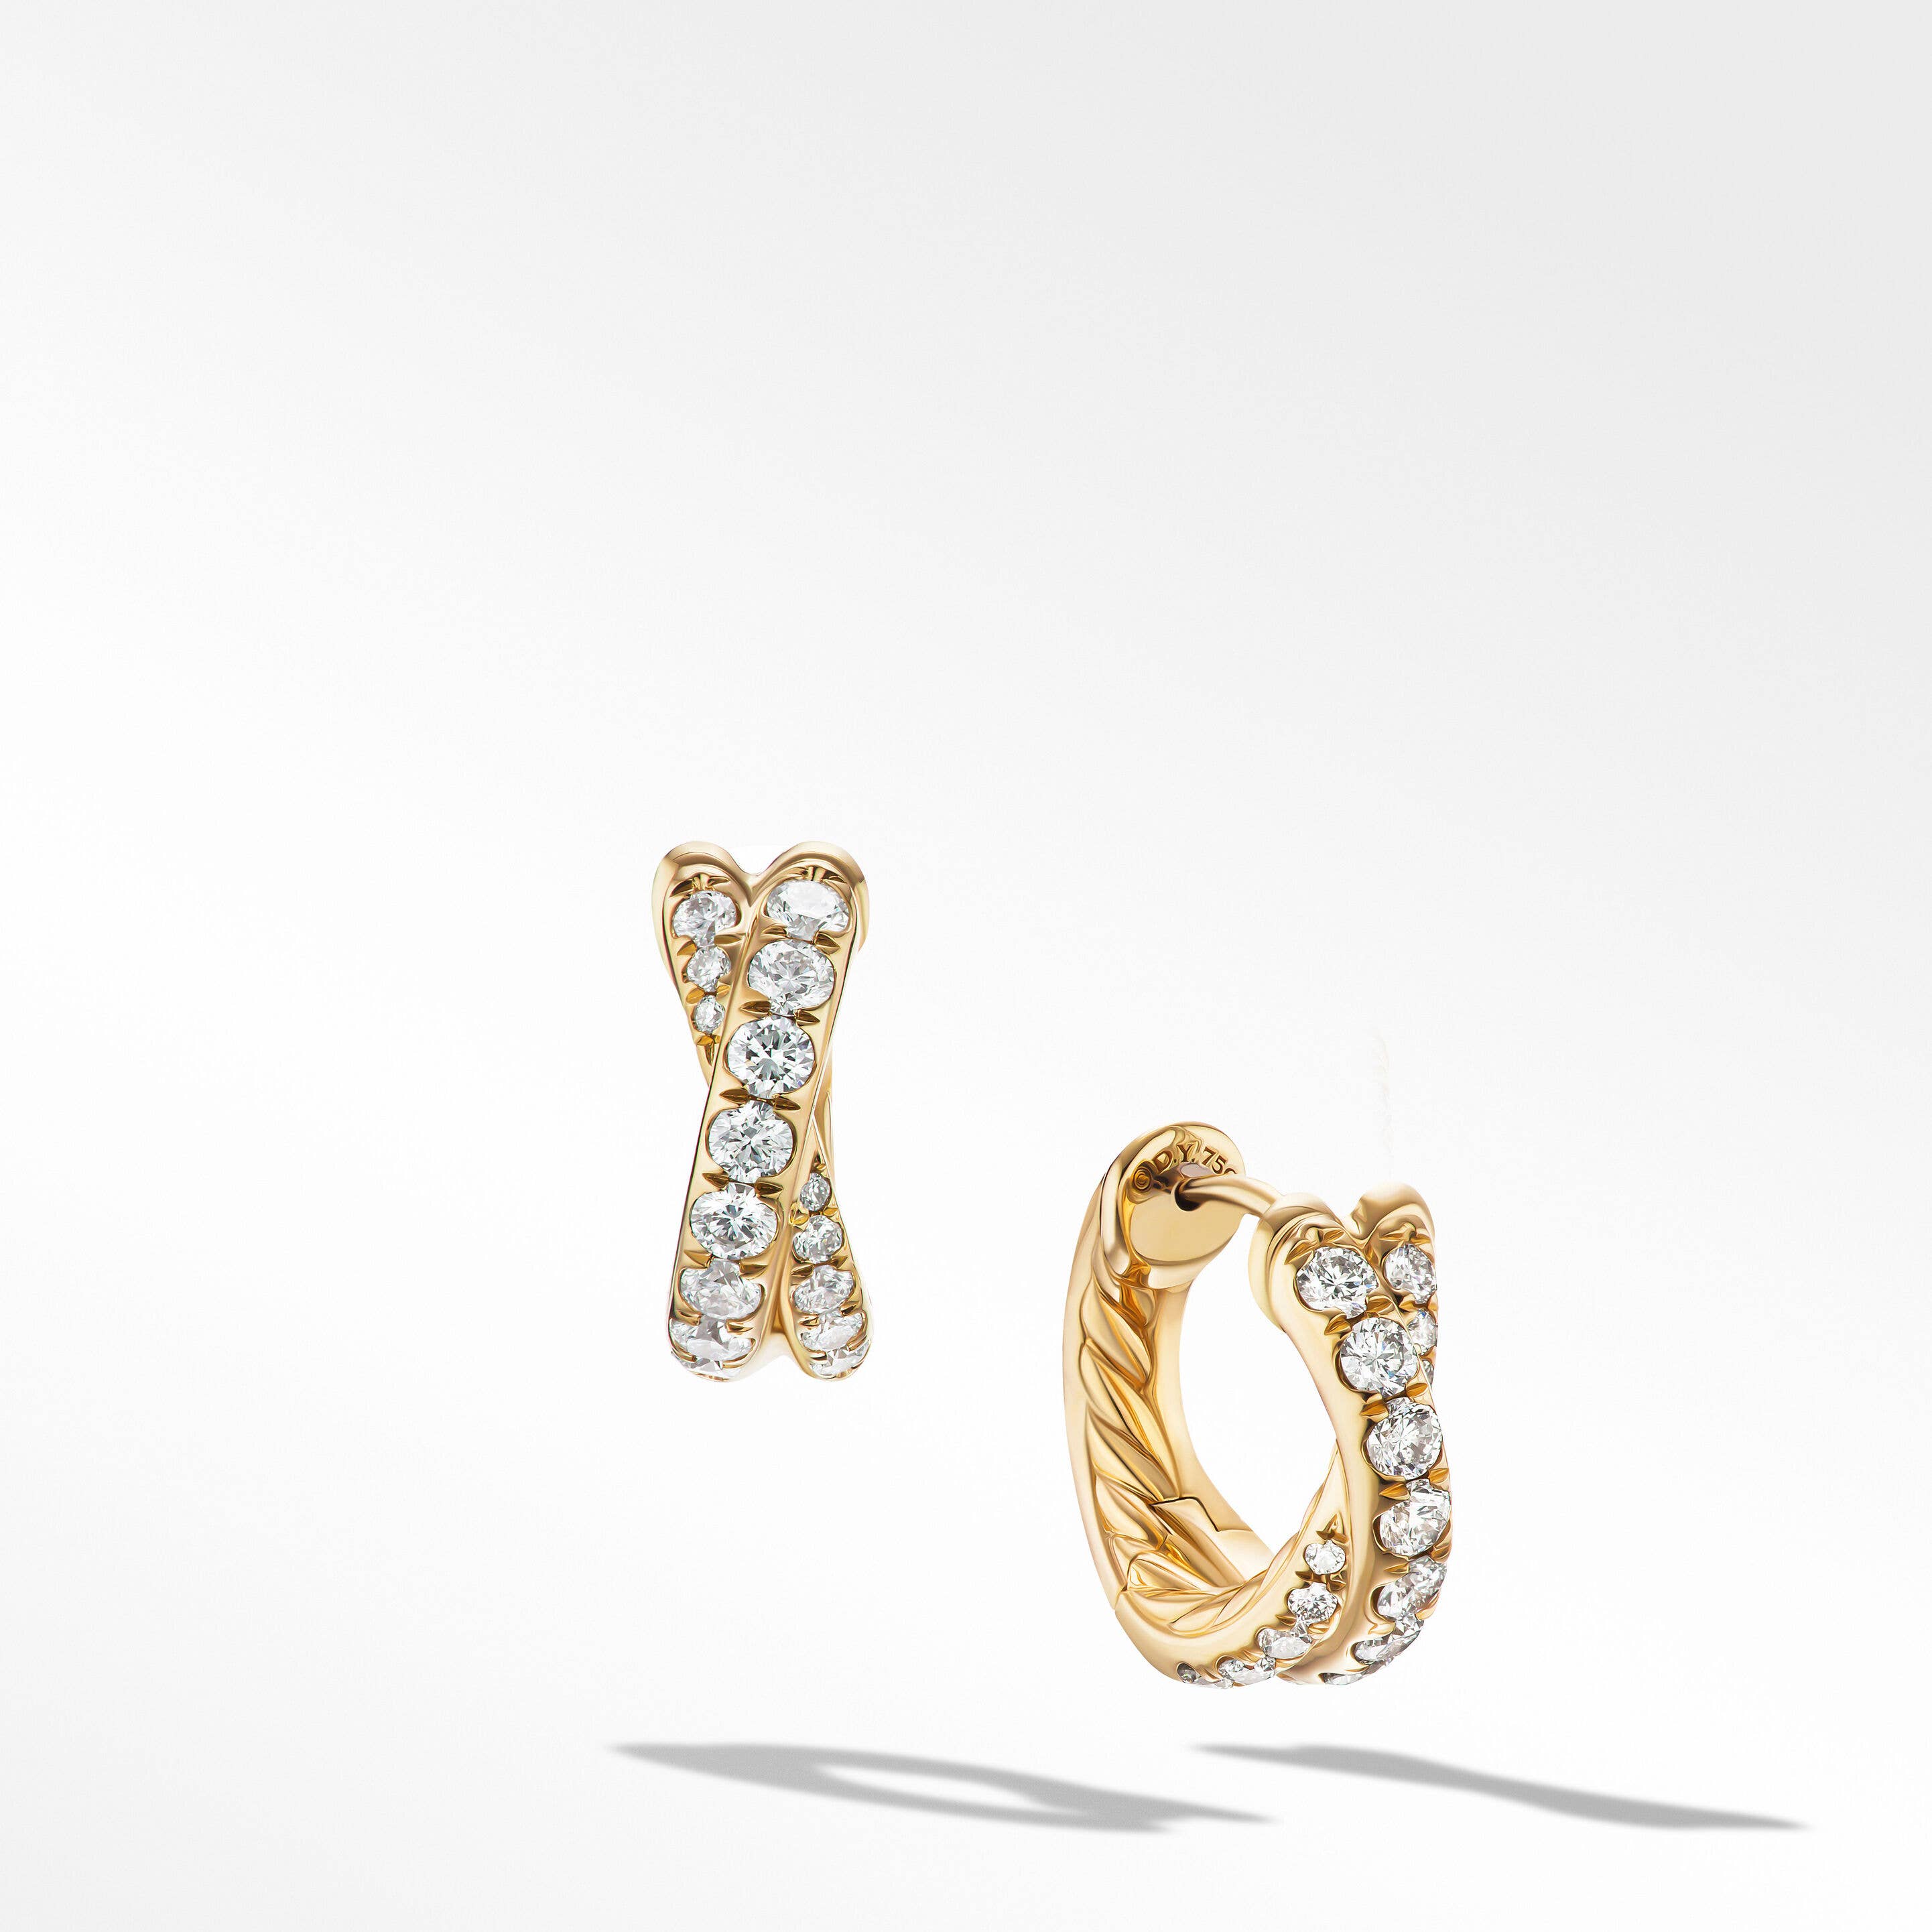 Pavé Crossover Hoop Earrings in 18K Yellow Gold with Diamonds